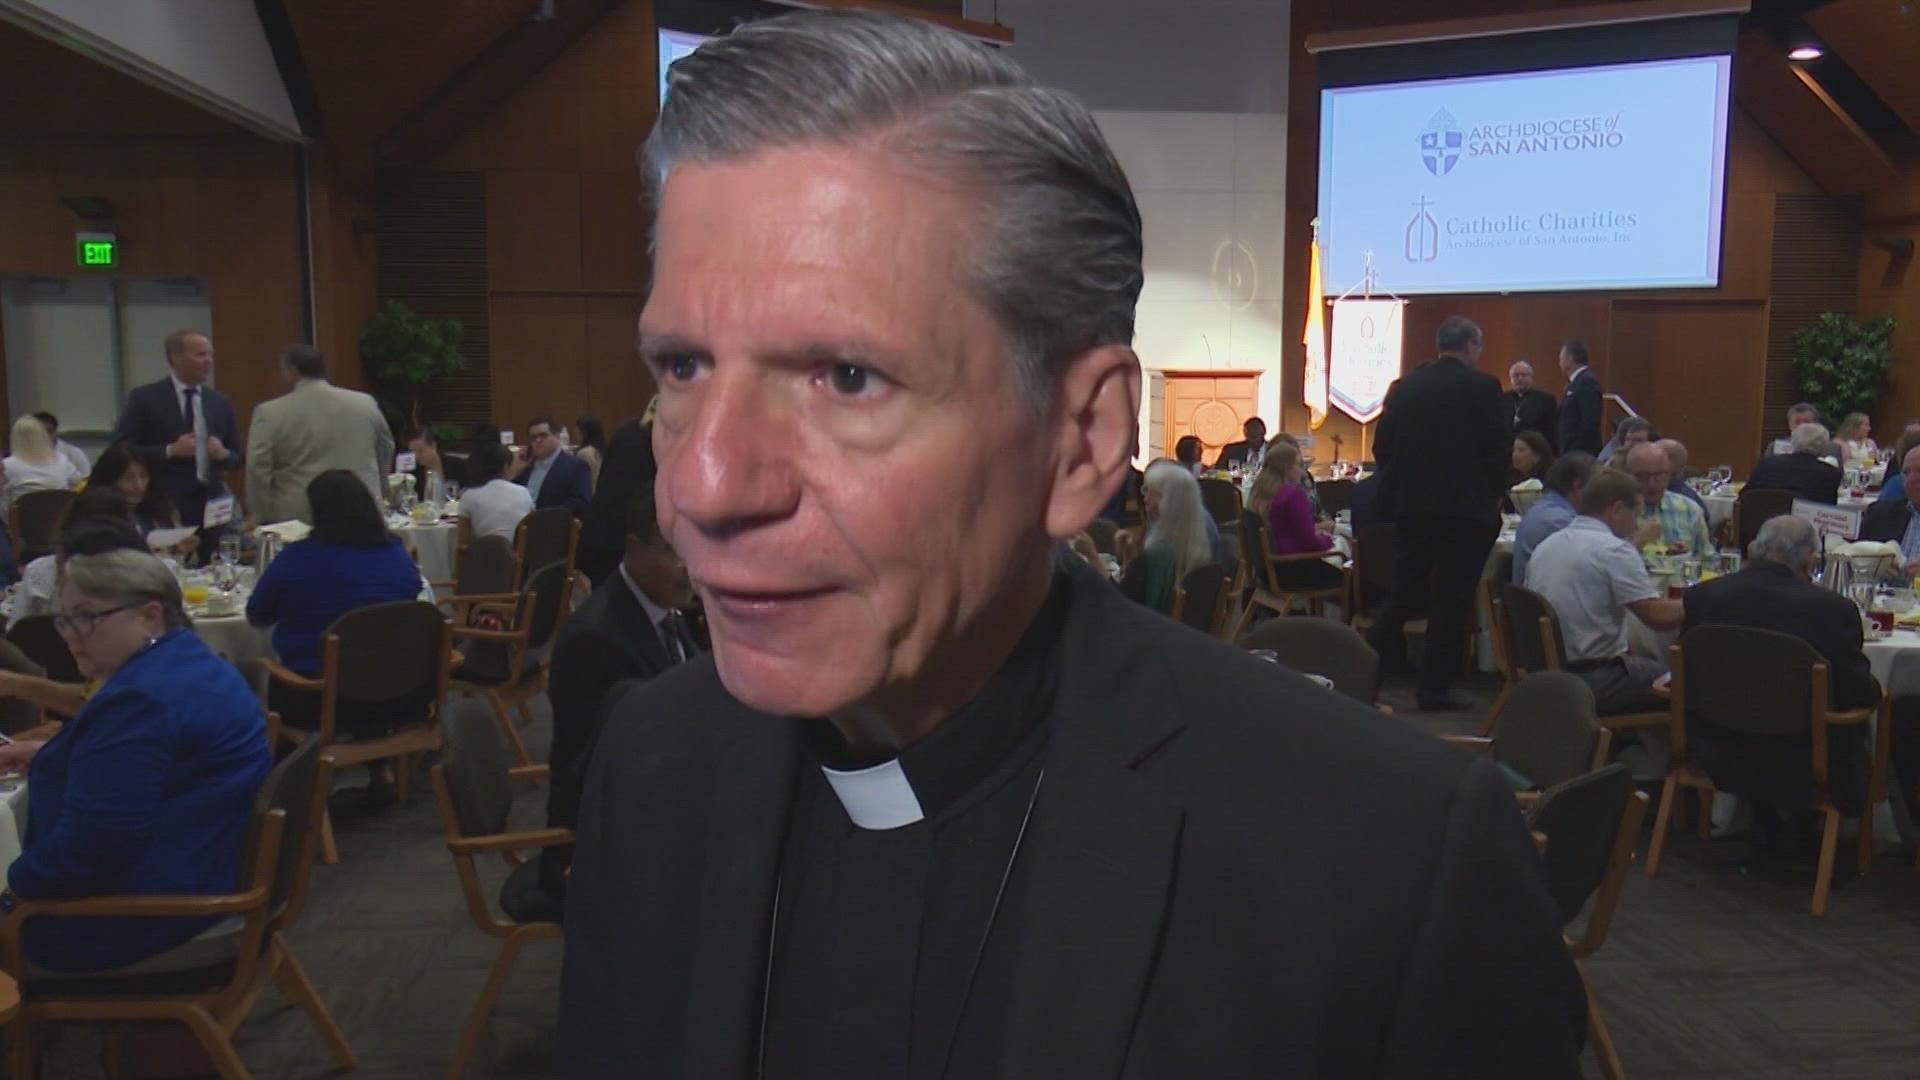 San Antonio Archdiocese holds prayer breakfast in aftermath of Uvalde mass shooting.